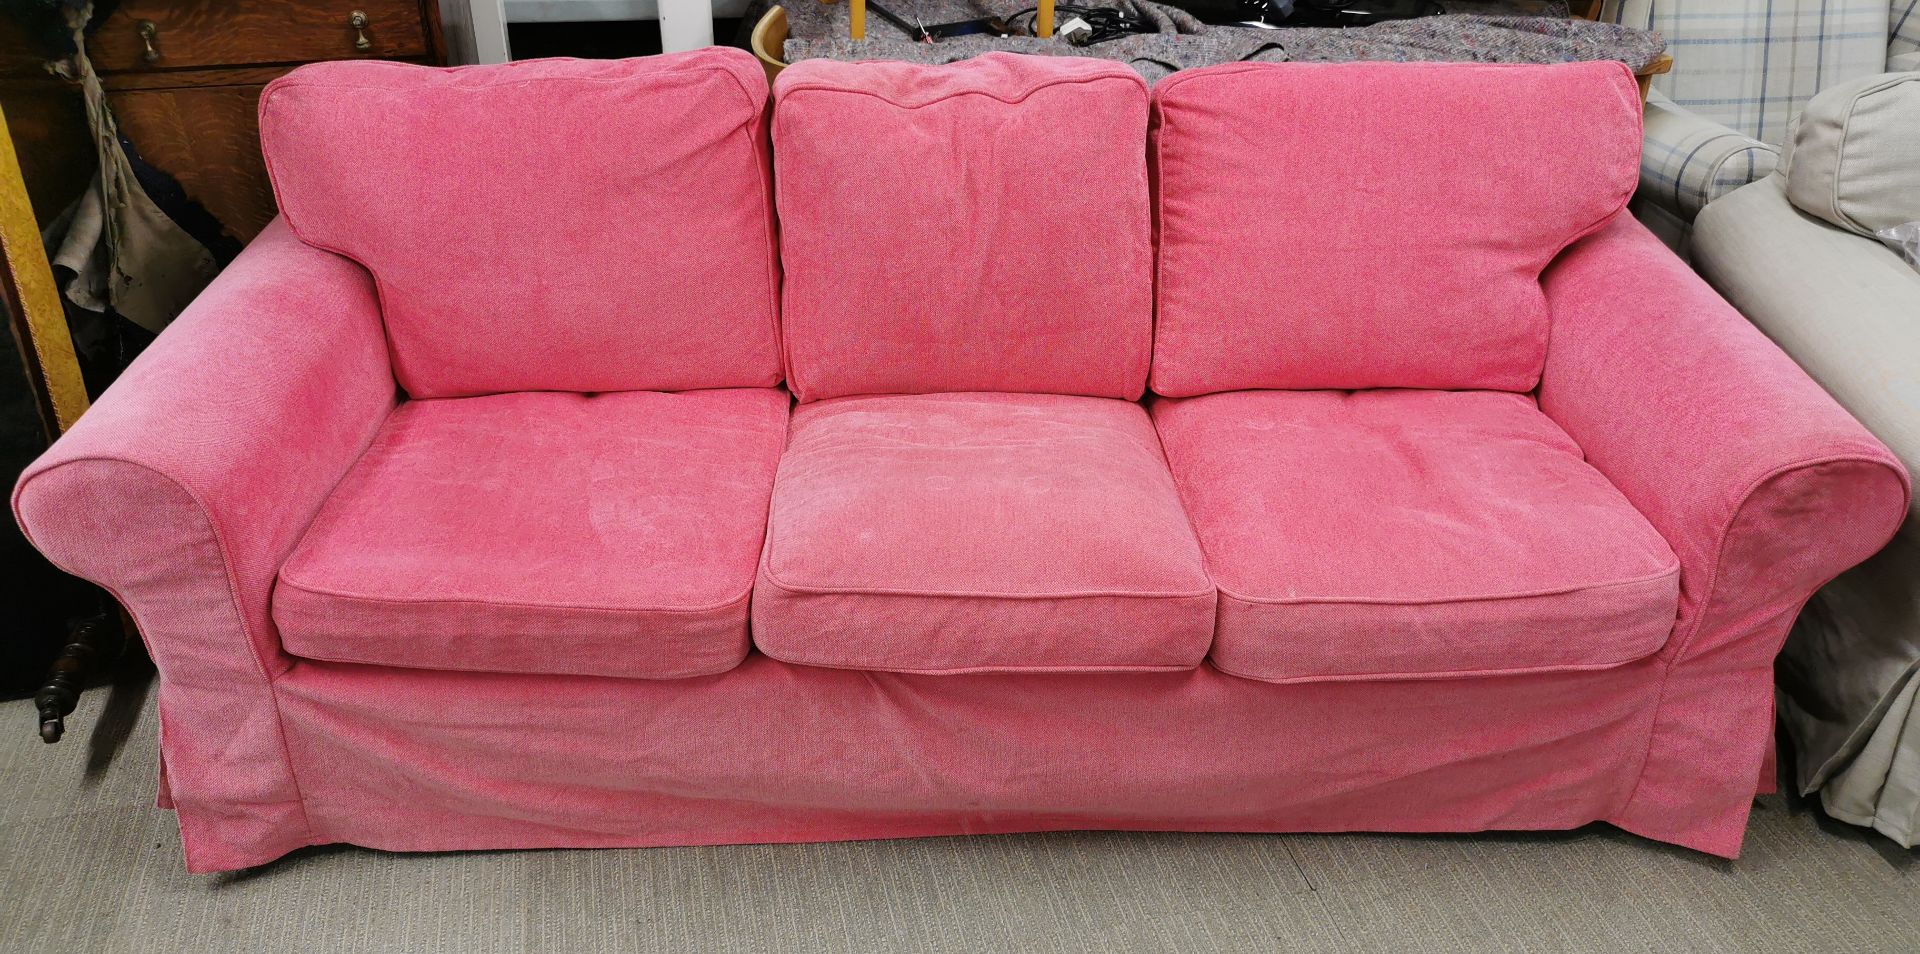 A three seater settee together with a matching two seater settee, with an extra cover to match the